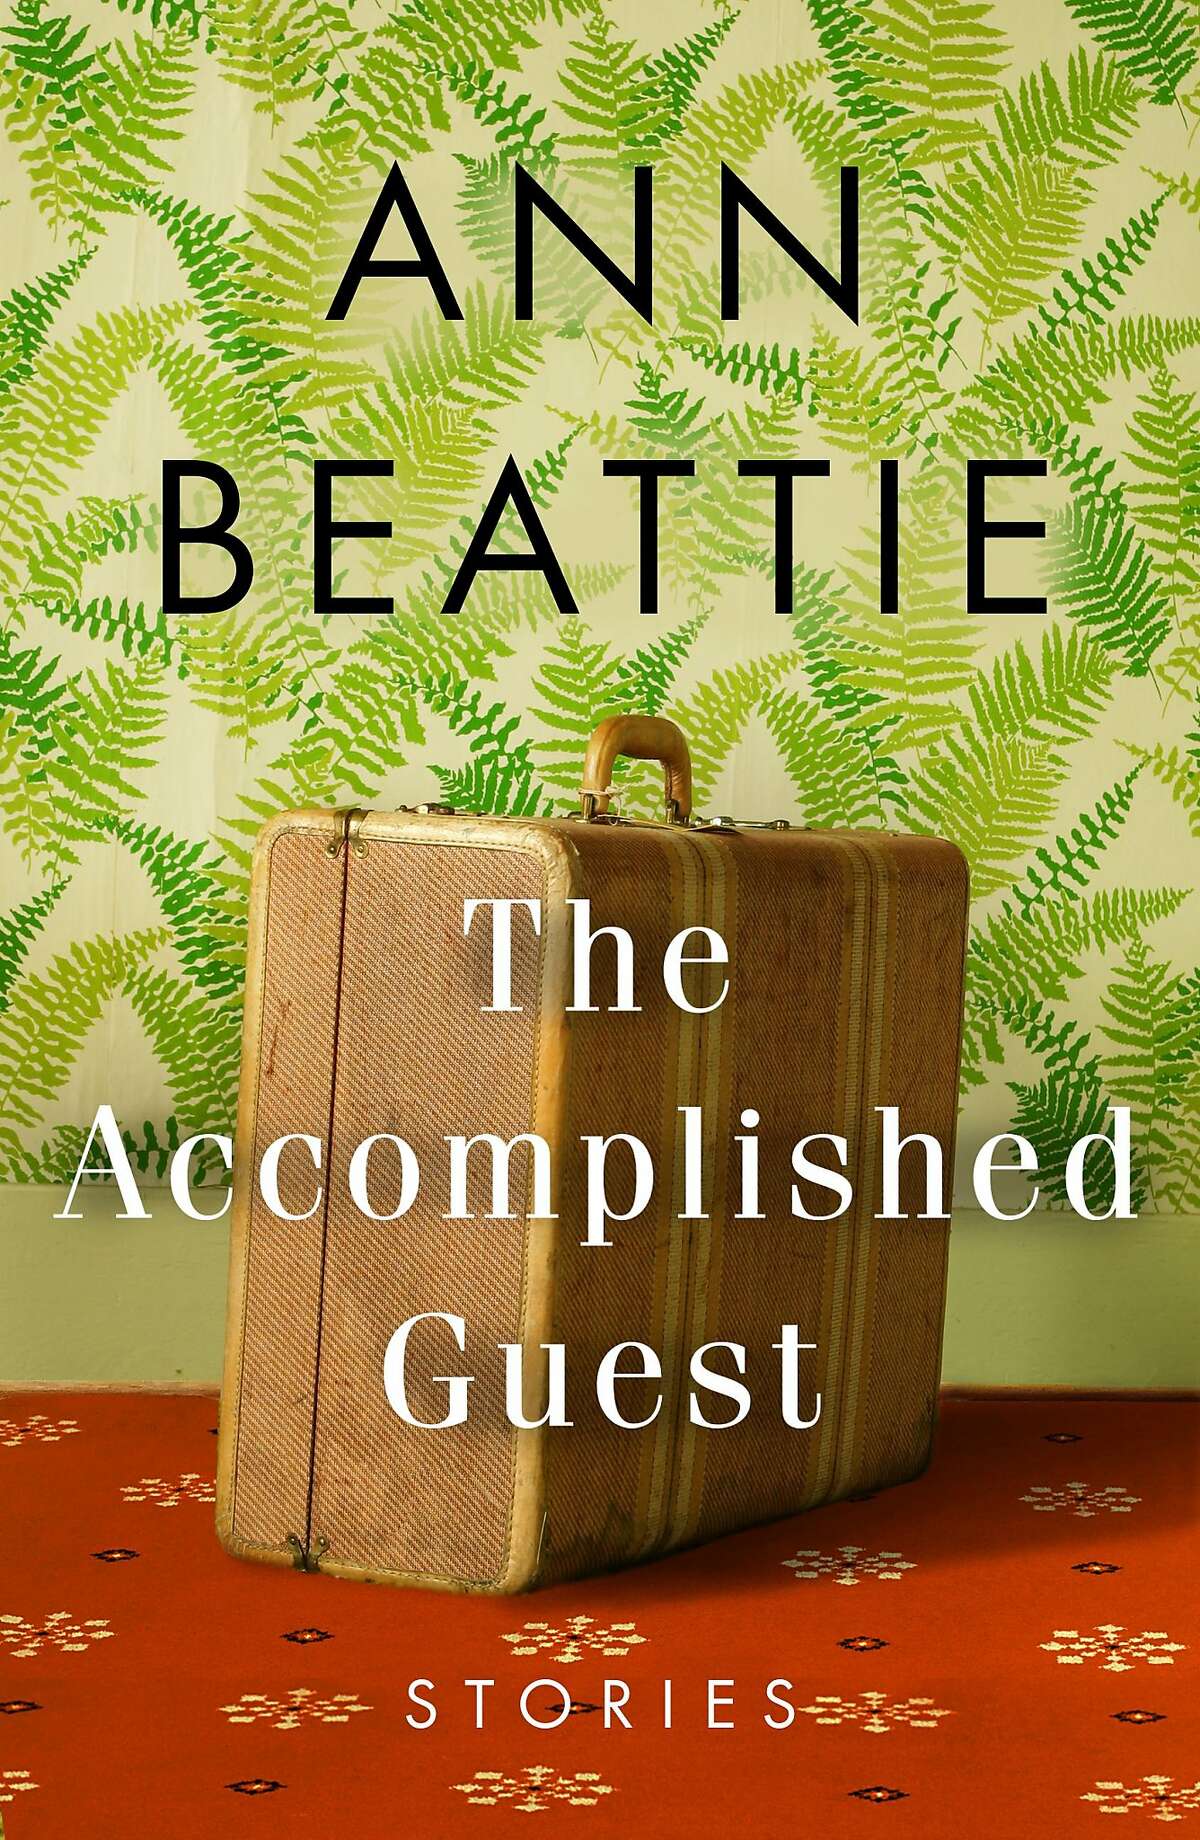 "The Accomplished Guest"